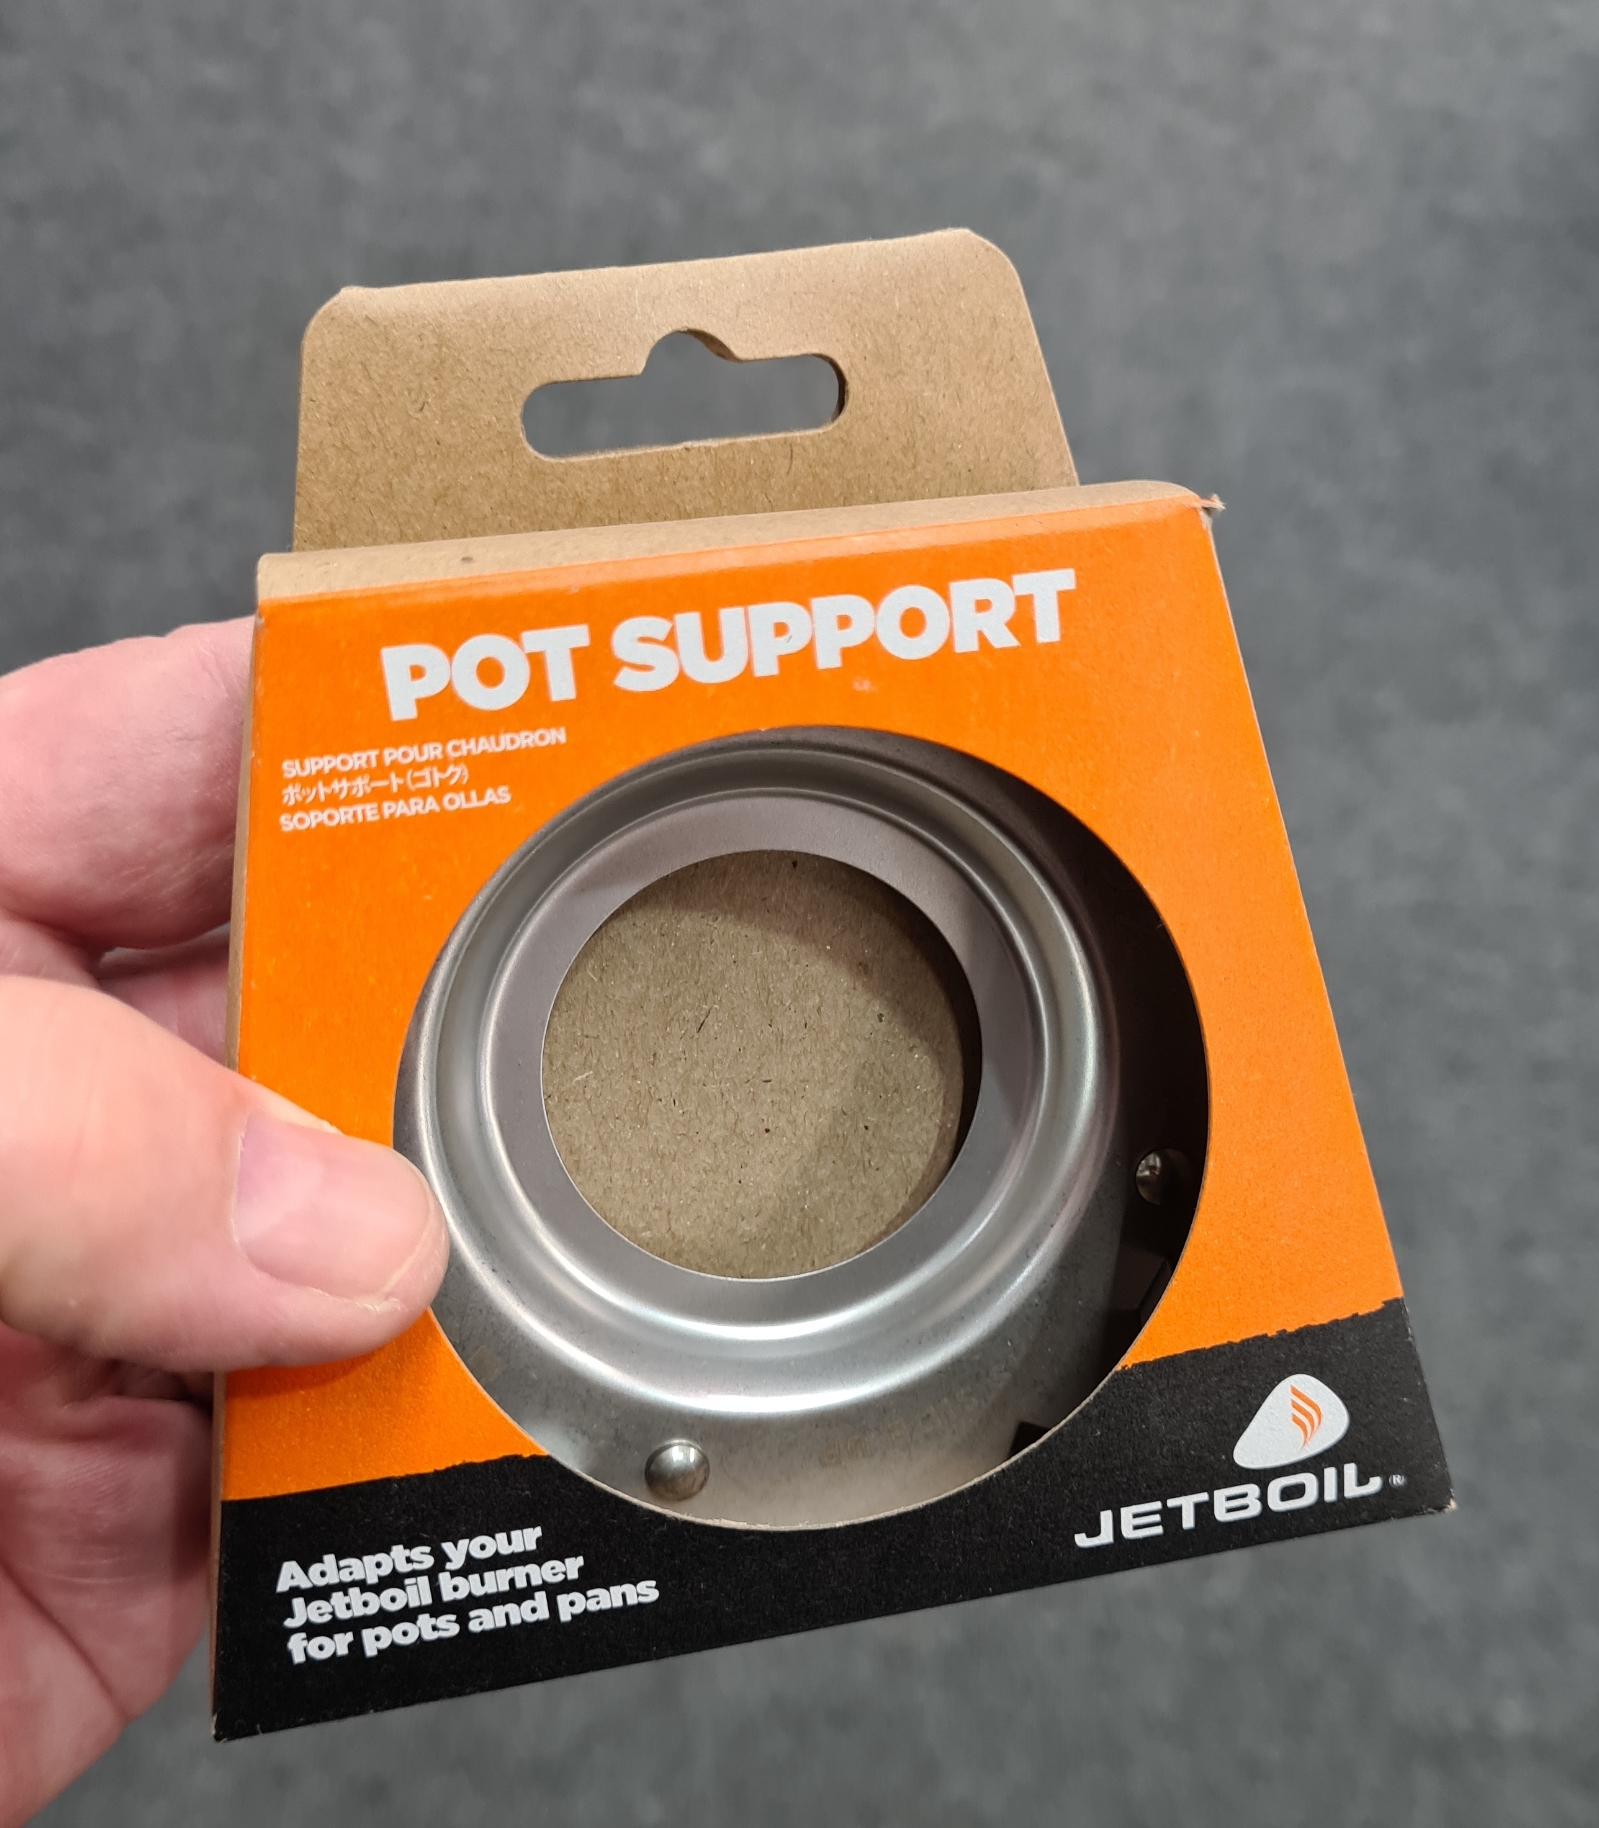 Jetboil pot support, front of packaging